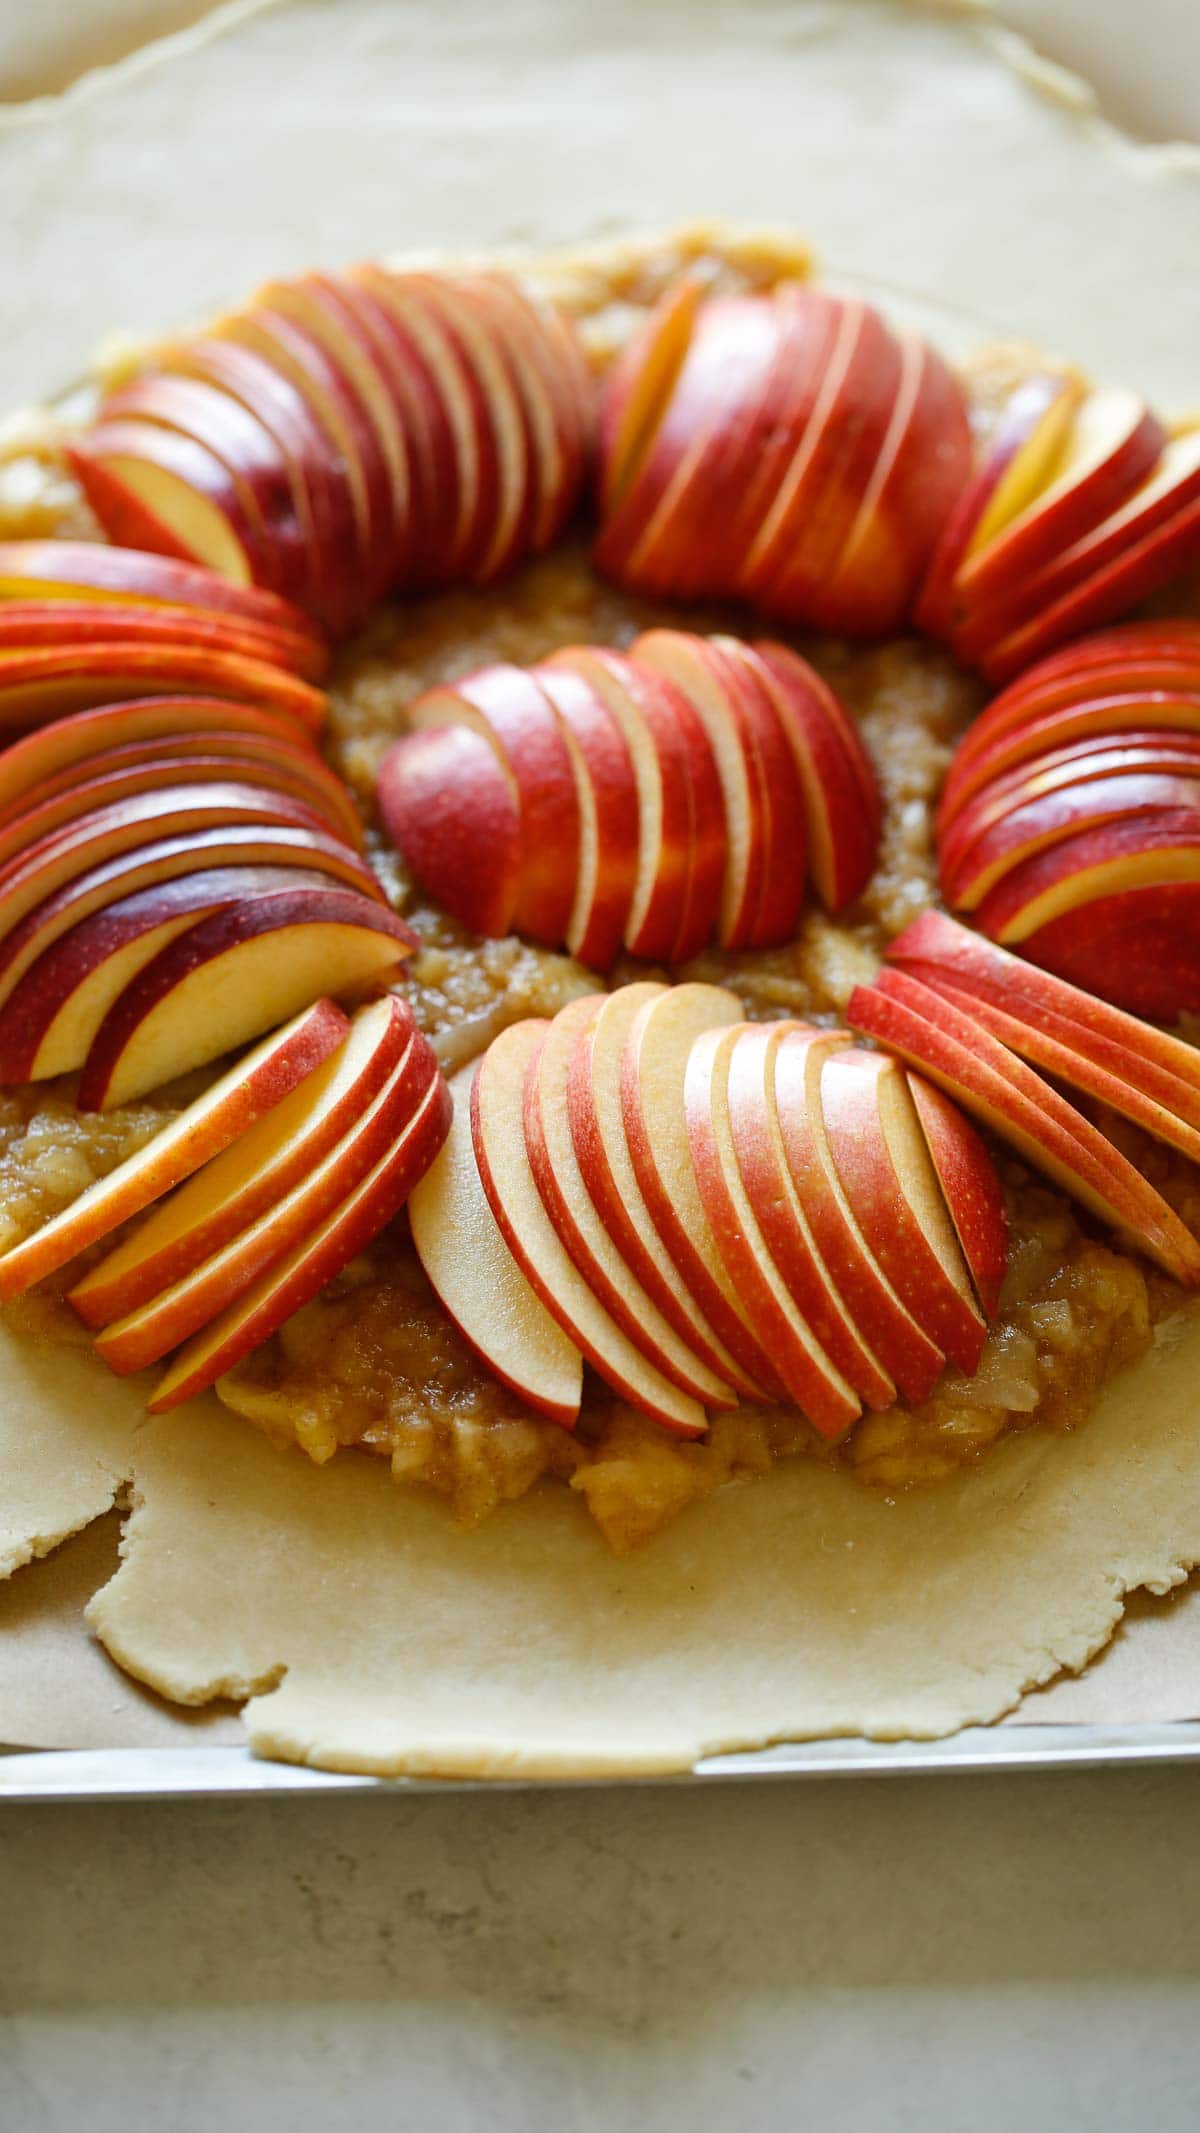 dough rolled out to a circle with apple compote in the center and apples fanned out in slices on top